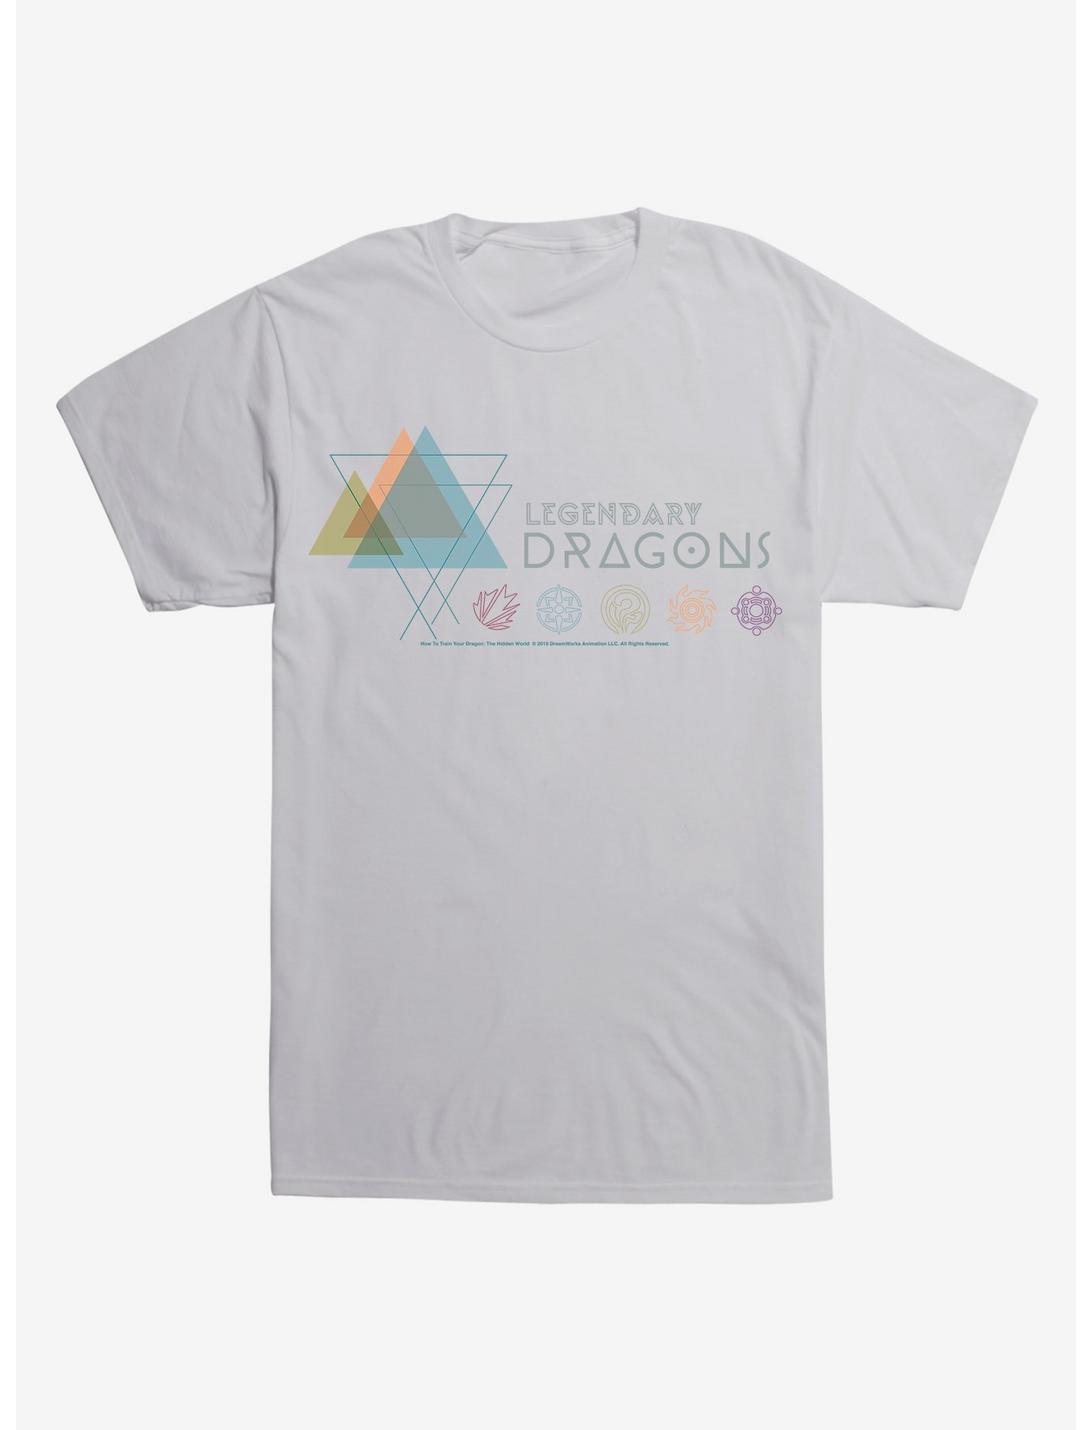 How To Train Your Dragon Legendary Dragons T-Shirt, SILVER, hi-res